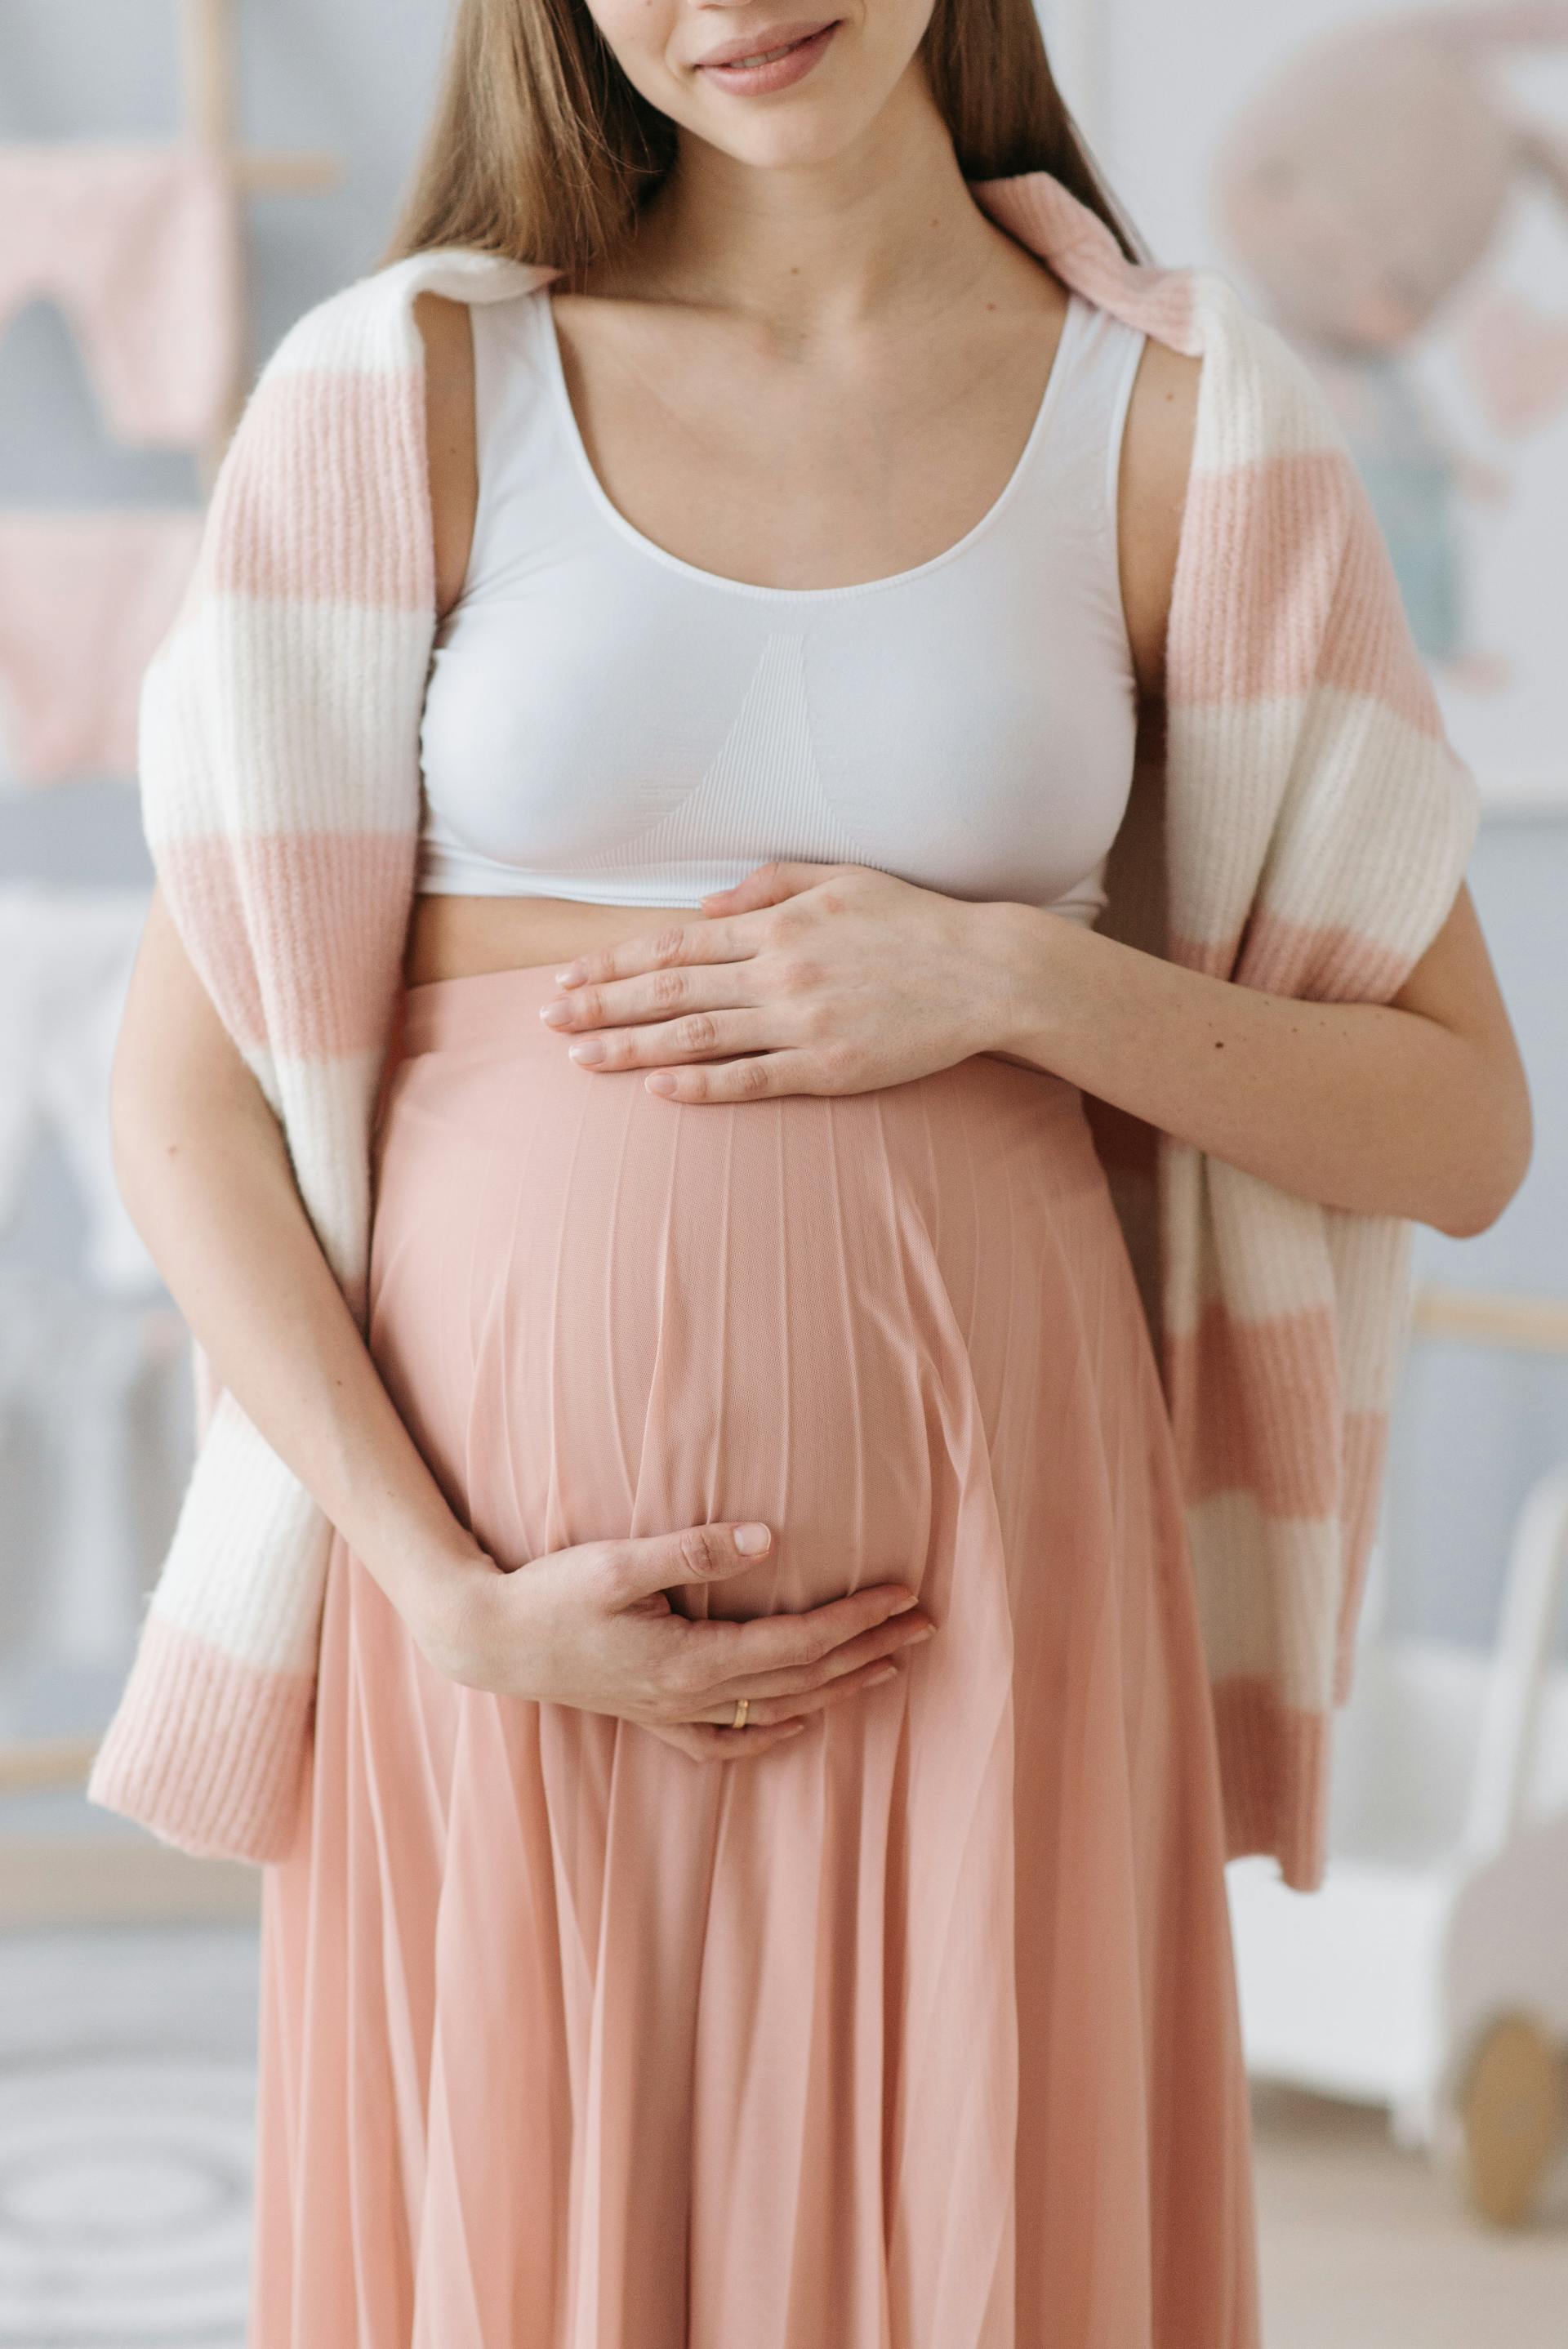 A person holding her pregnant belly | Source: Pexels